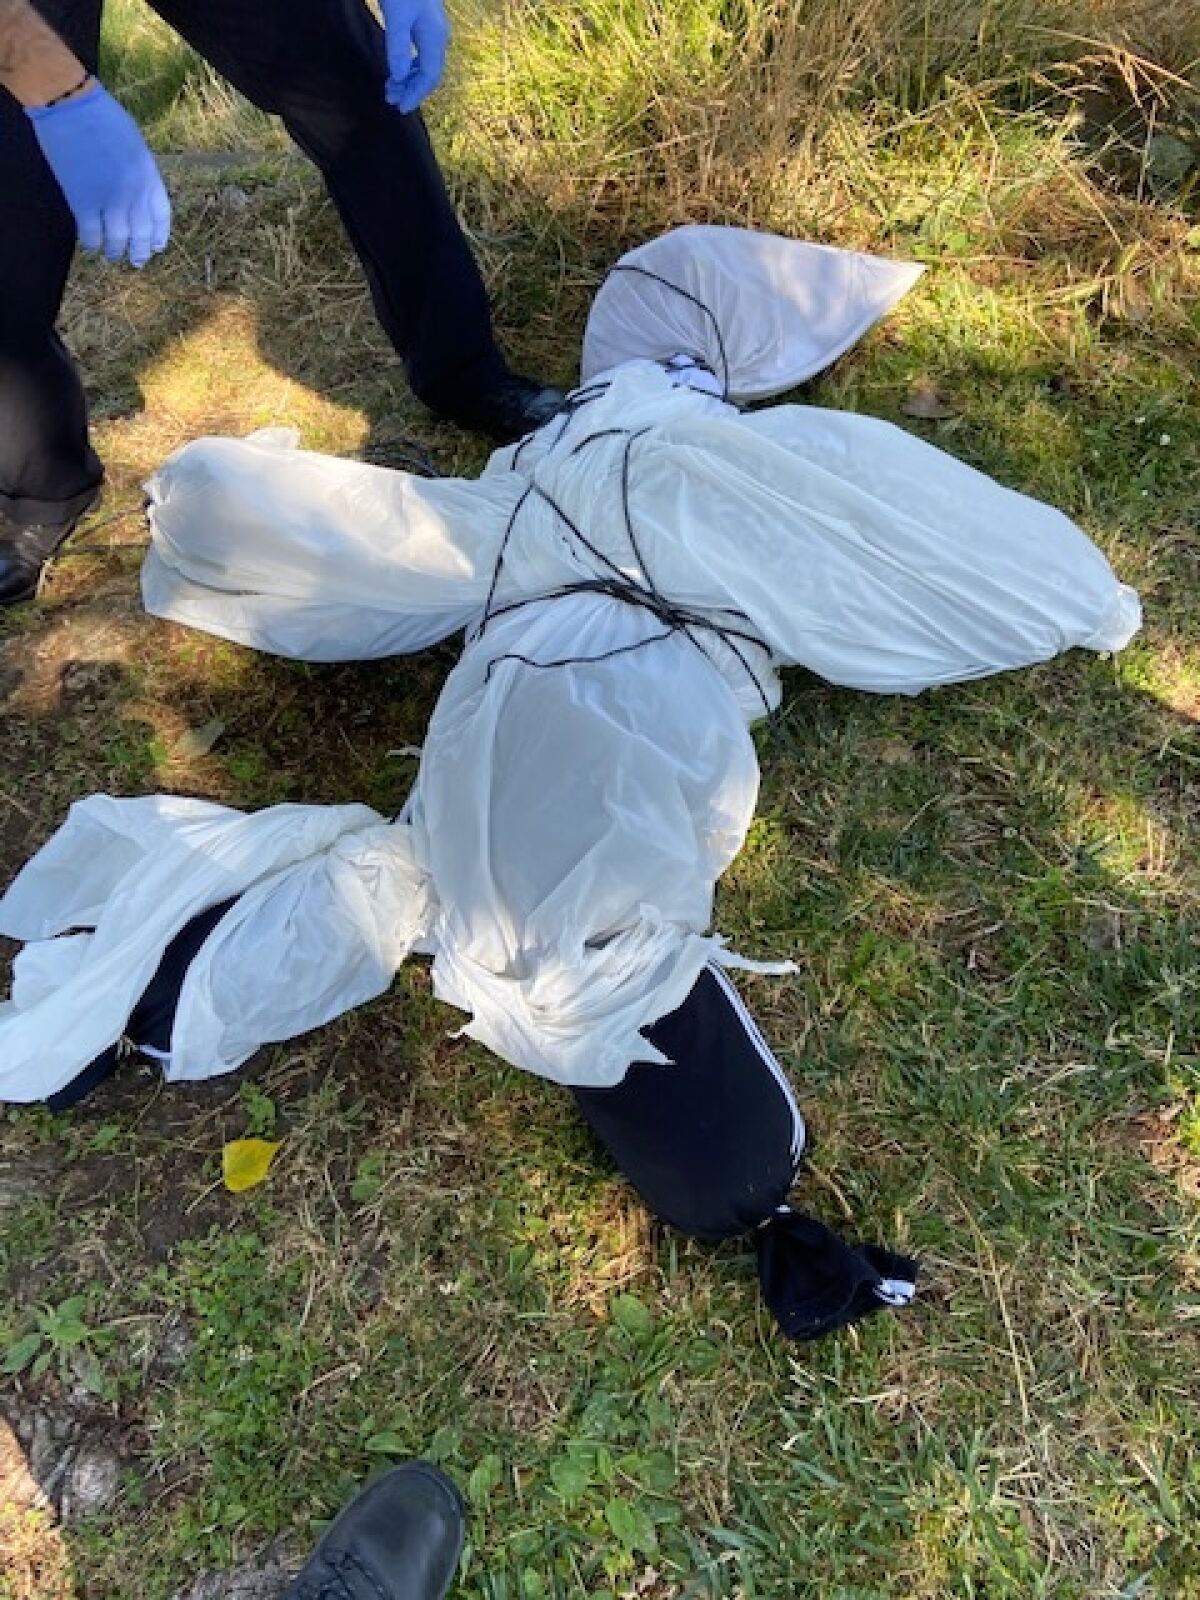 The effigy found at Lake Merritt in Oakland was wearing black sweatpants.